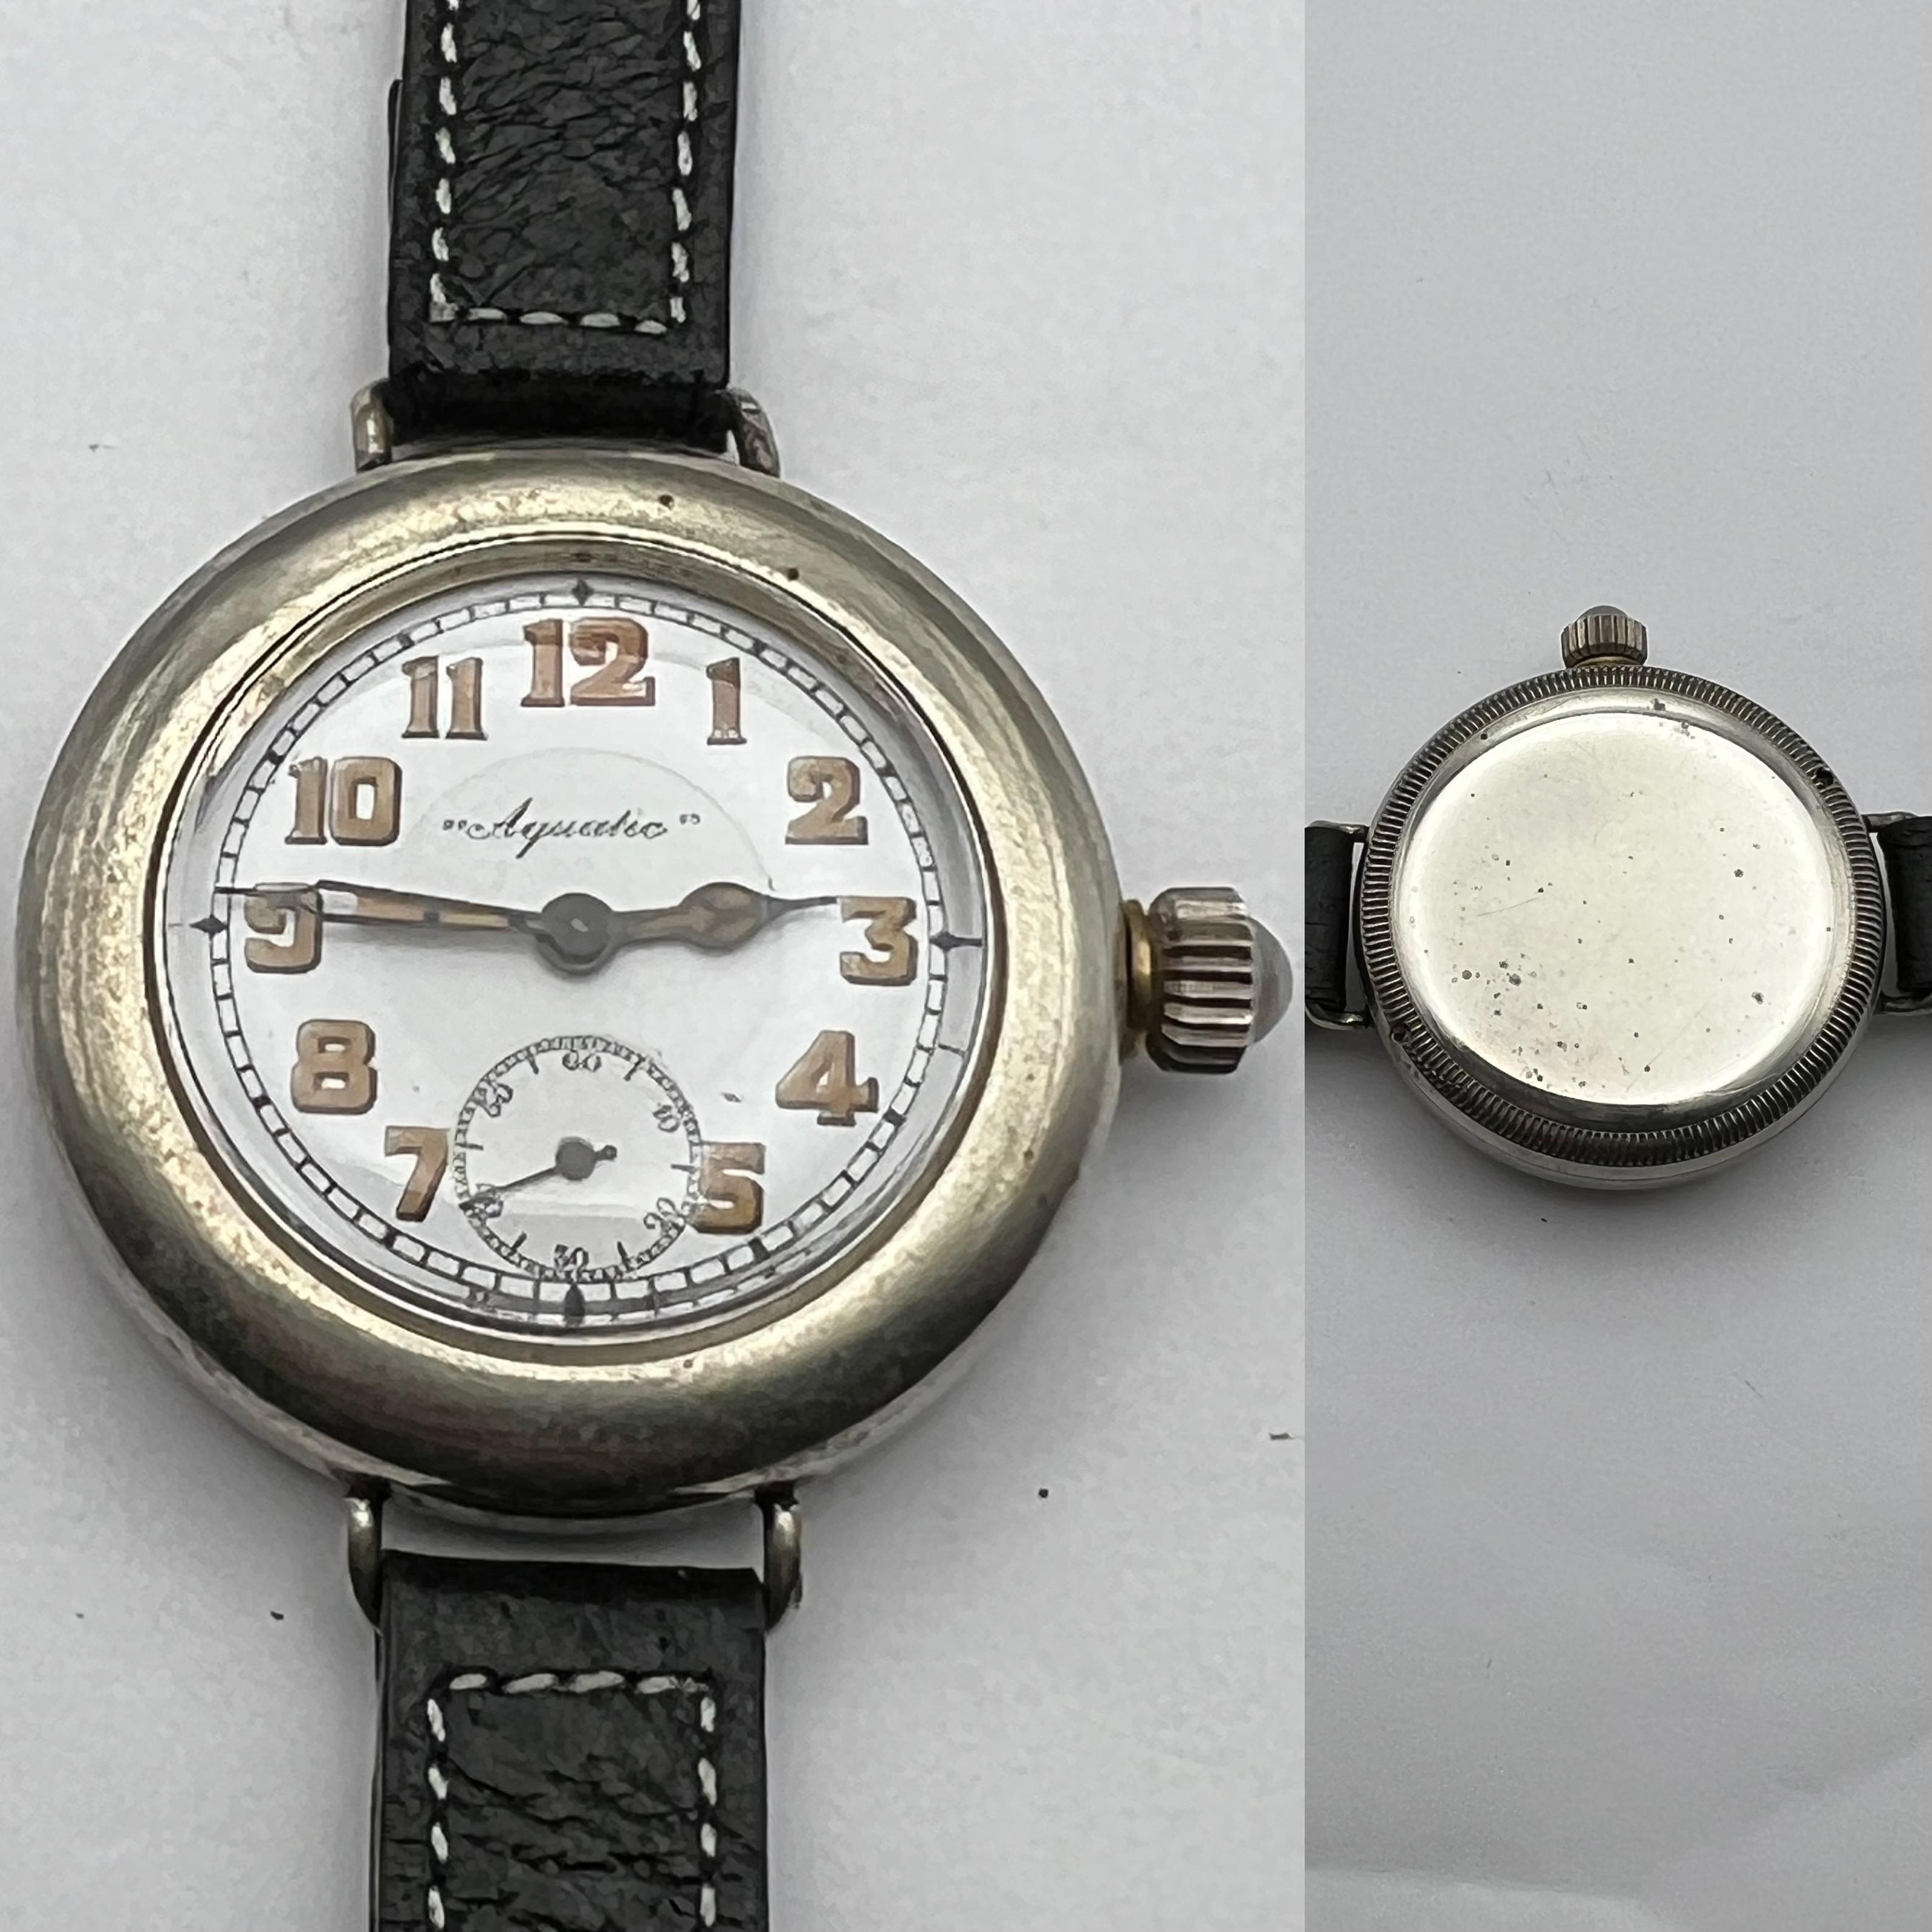 Rare, Rare, Harrods/Fortis Water Resistant Dive Watch WW1, Nickel In Excellent Condition For Sale In Raleigh, NC